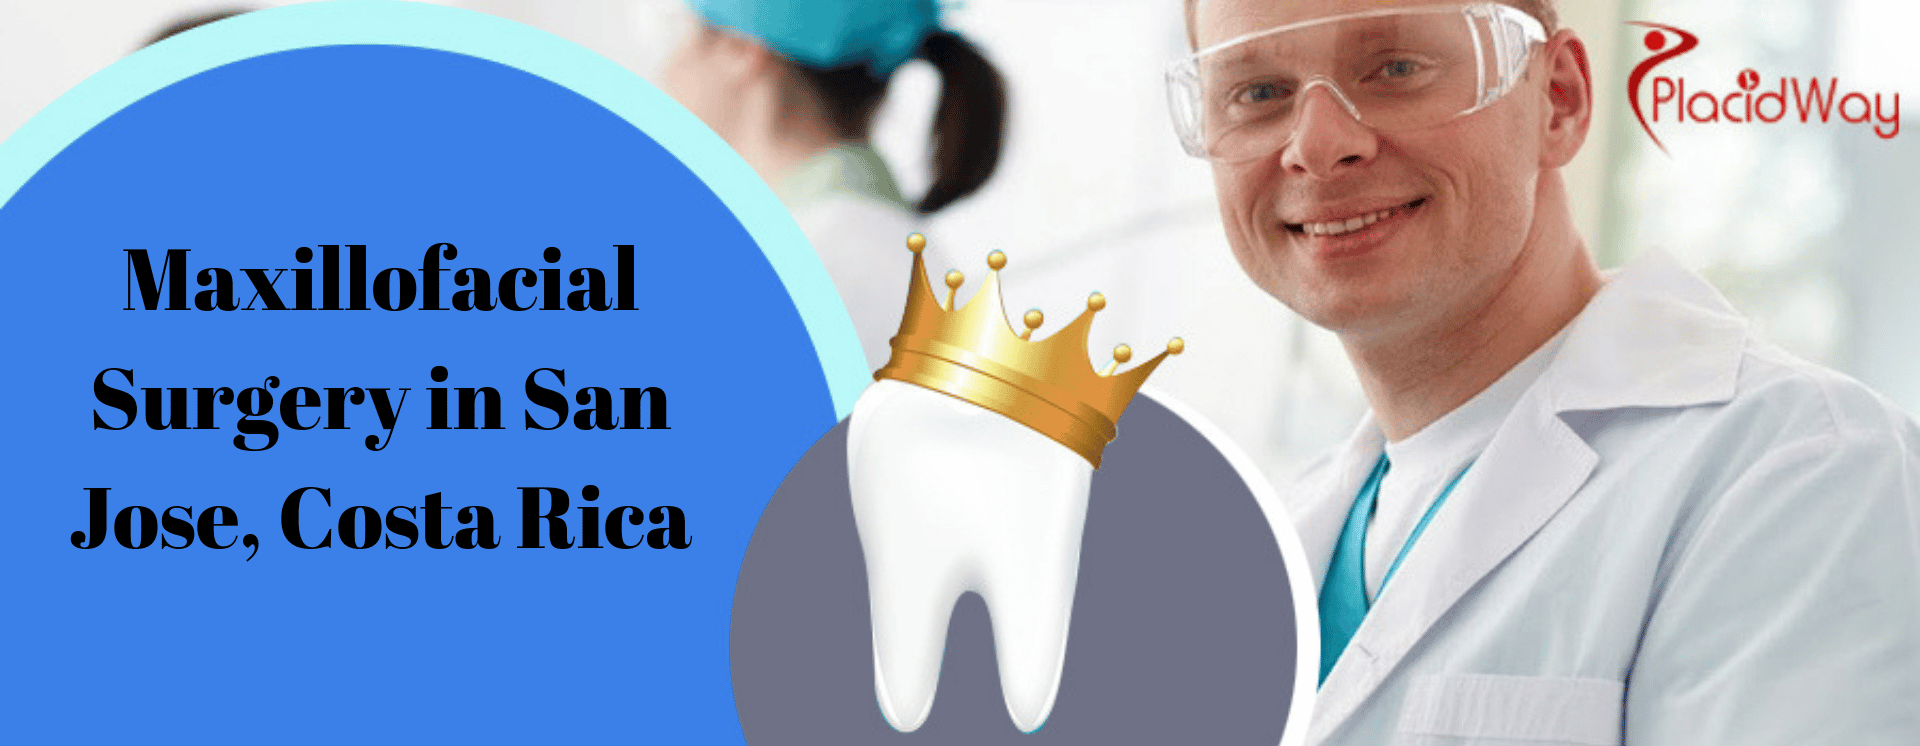 Best Affordable Treatment for Maxillofacial Surgery in San Jose, Costa Rica